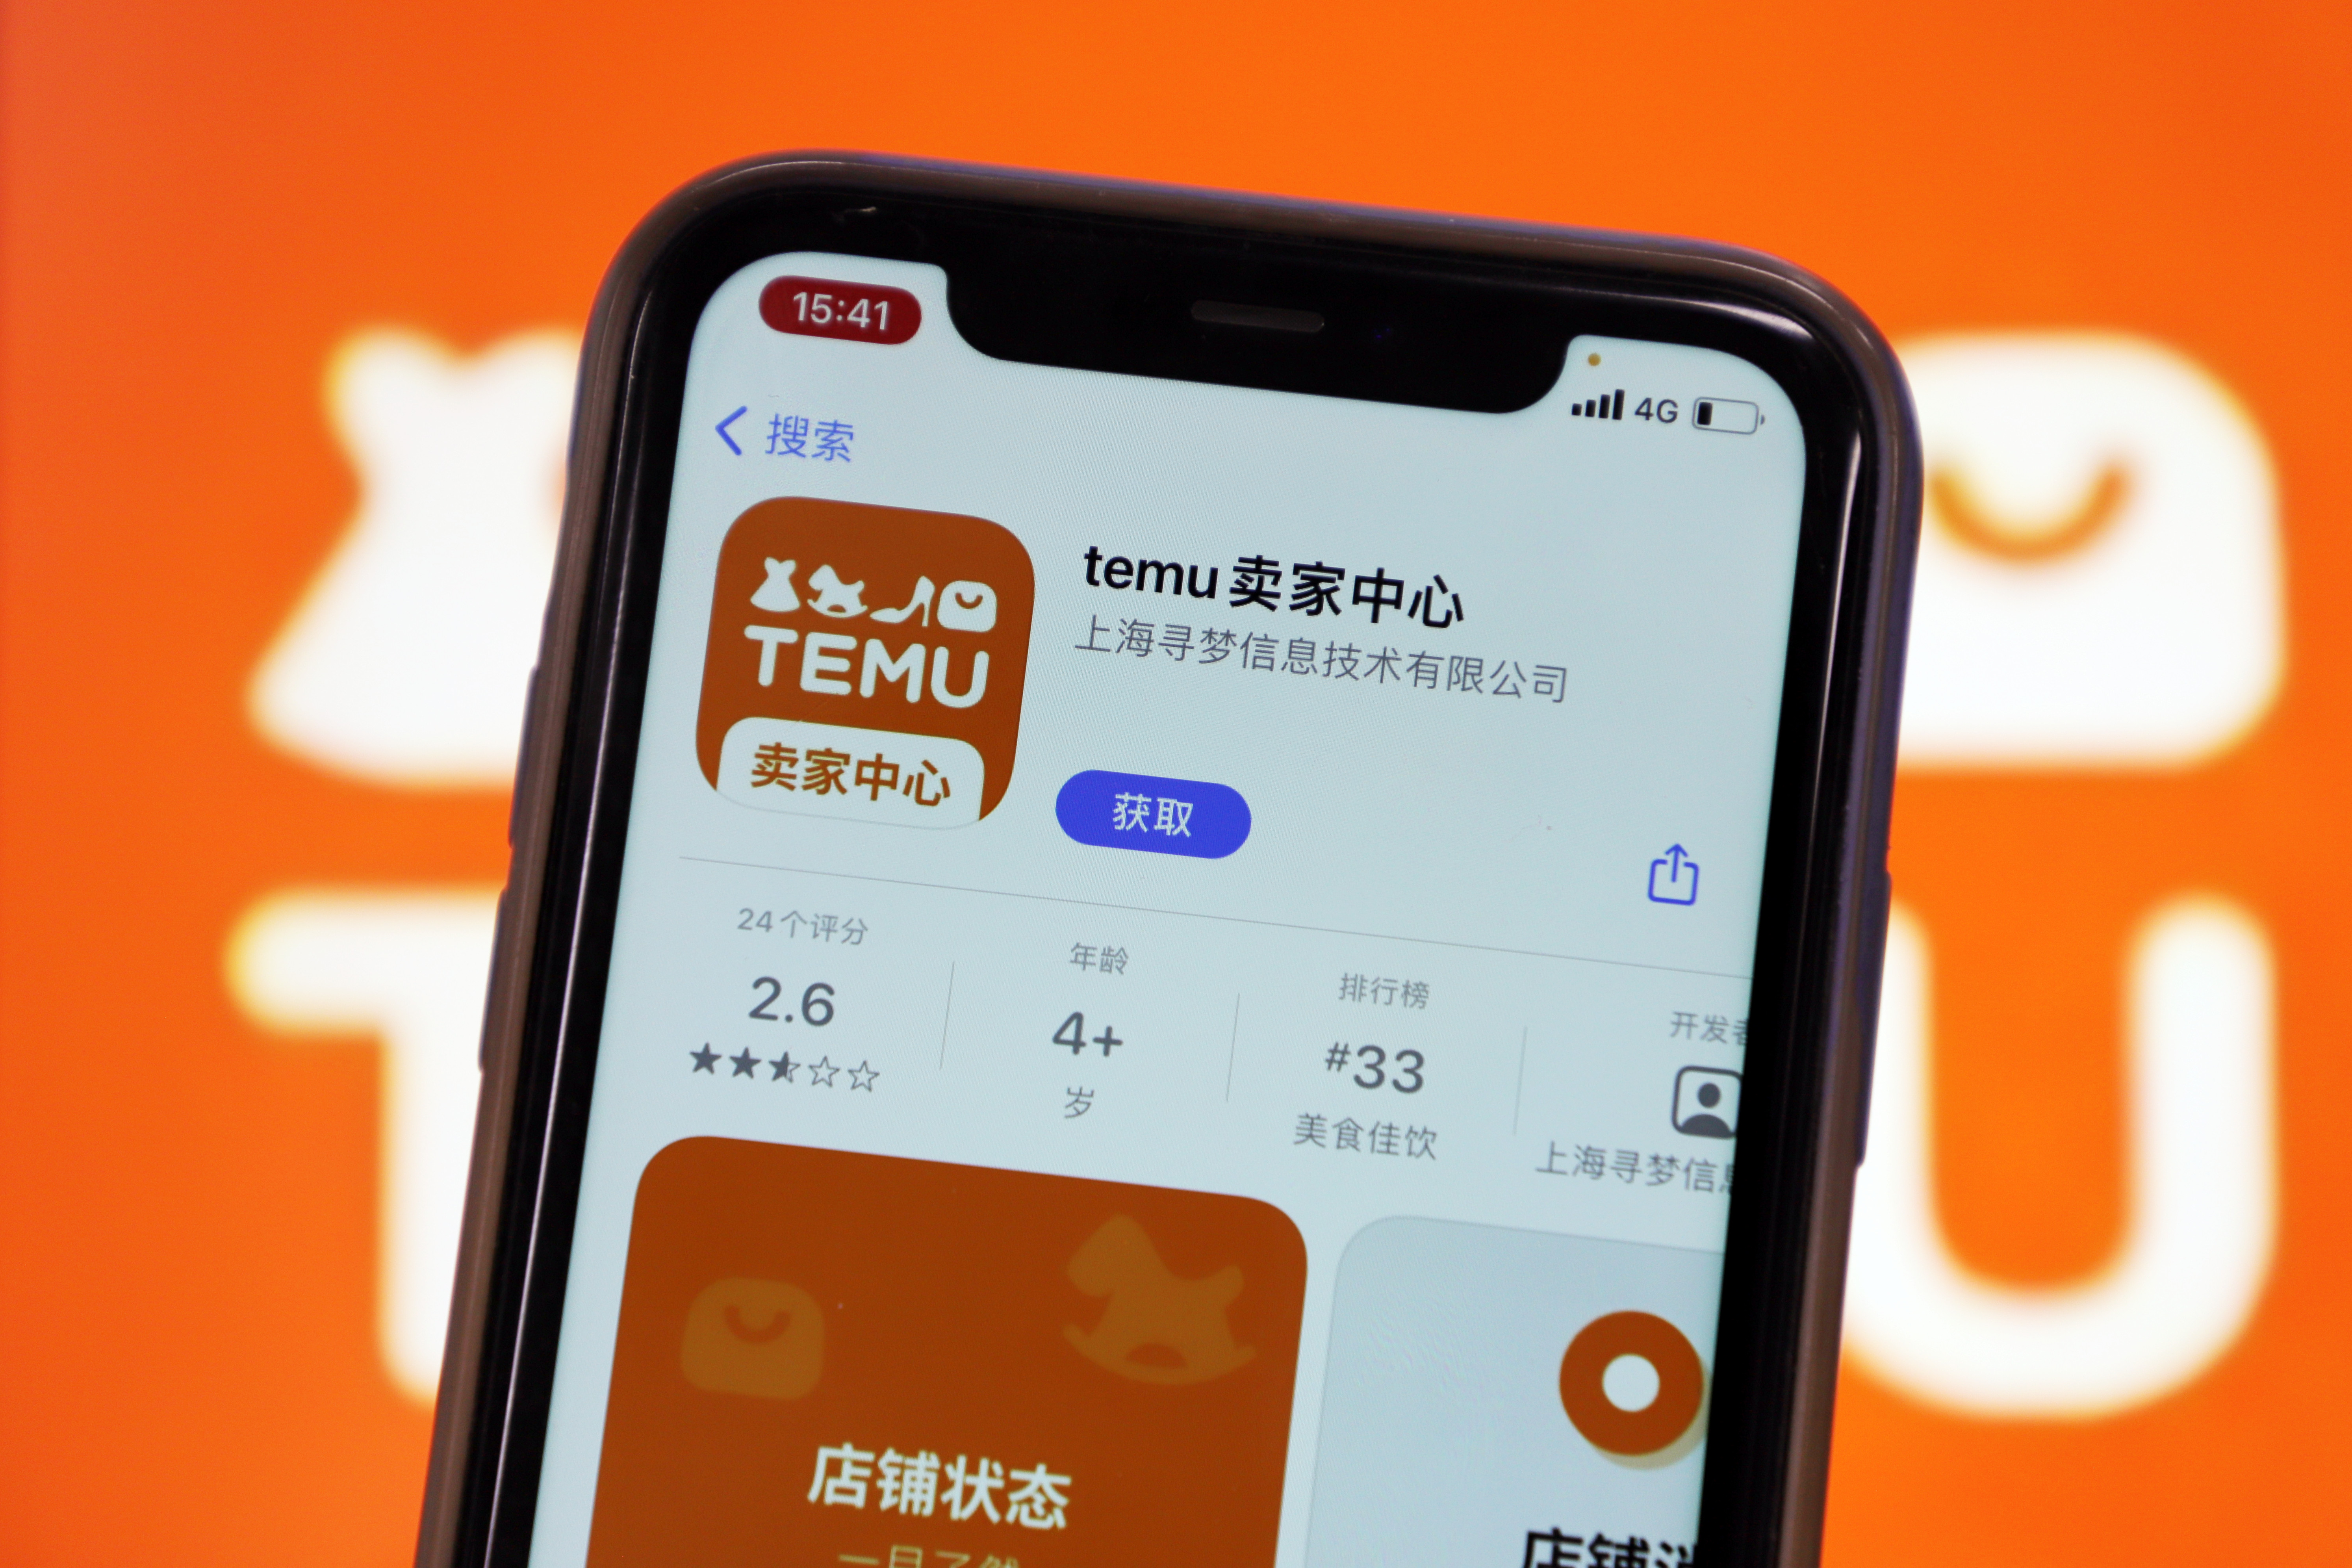 Temu, Chinese Shopping App, Sweeping the Internet. Here's What to Know